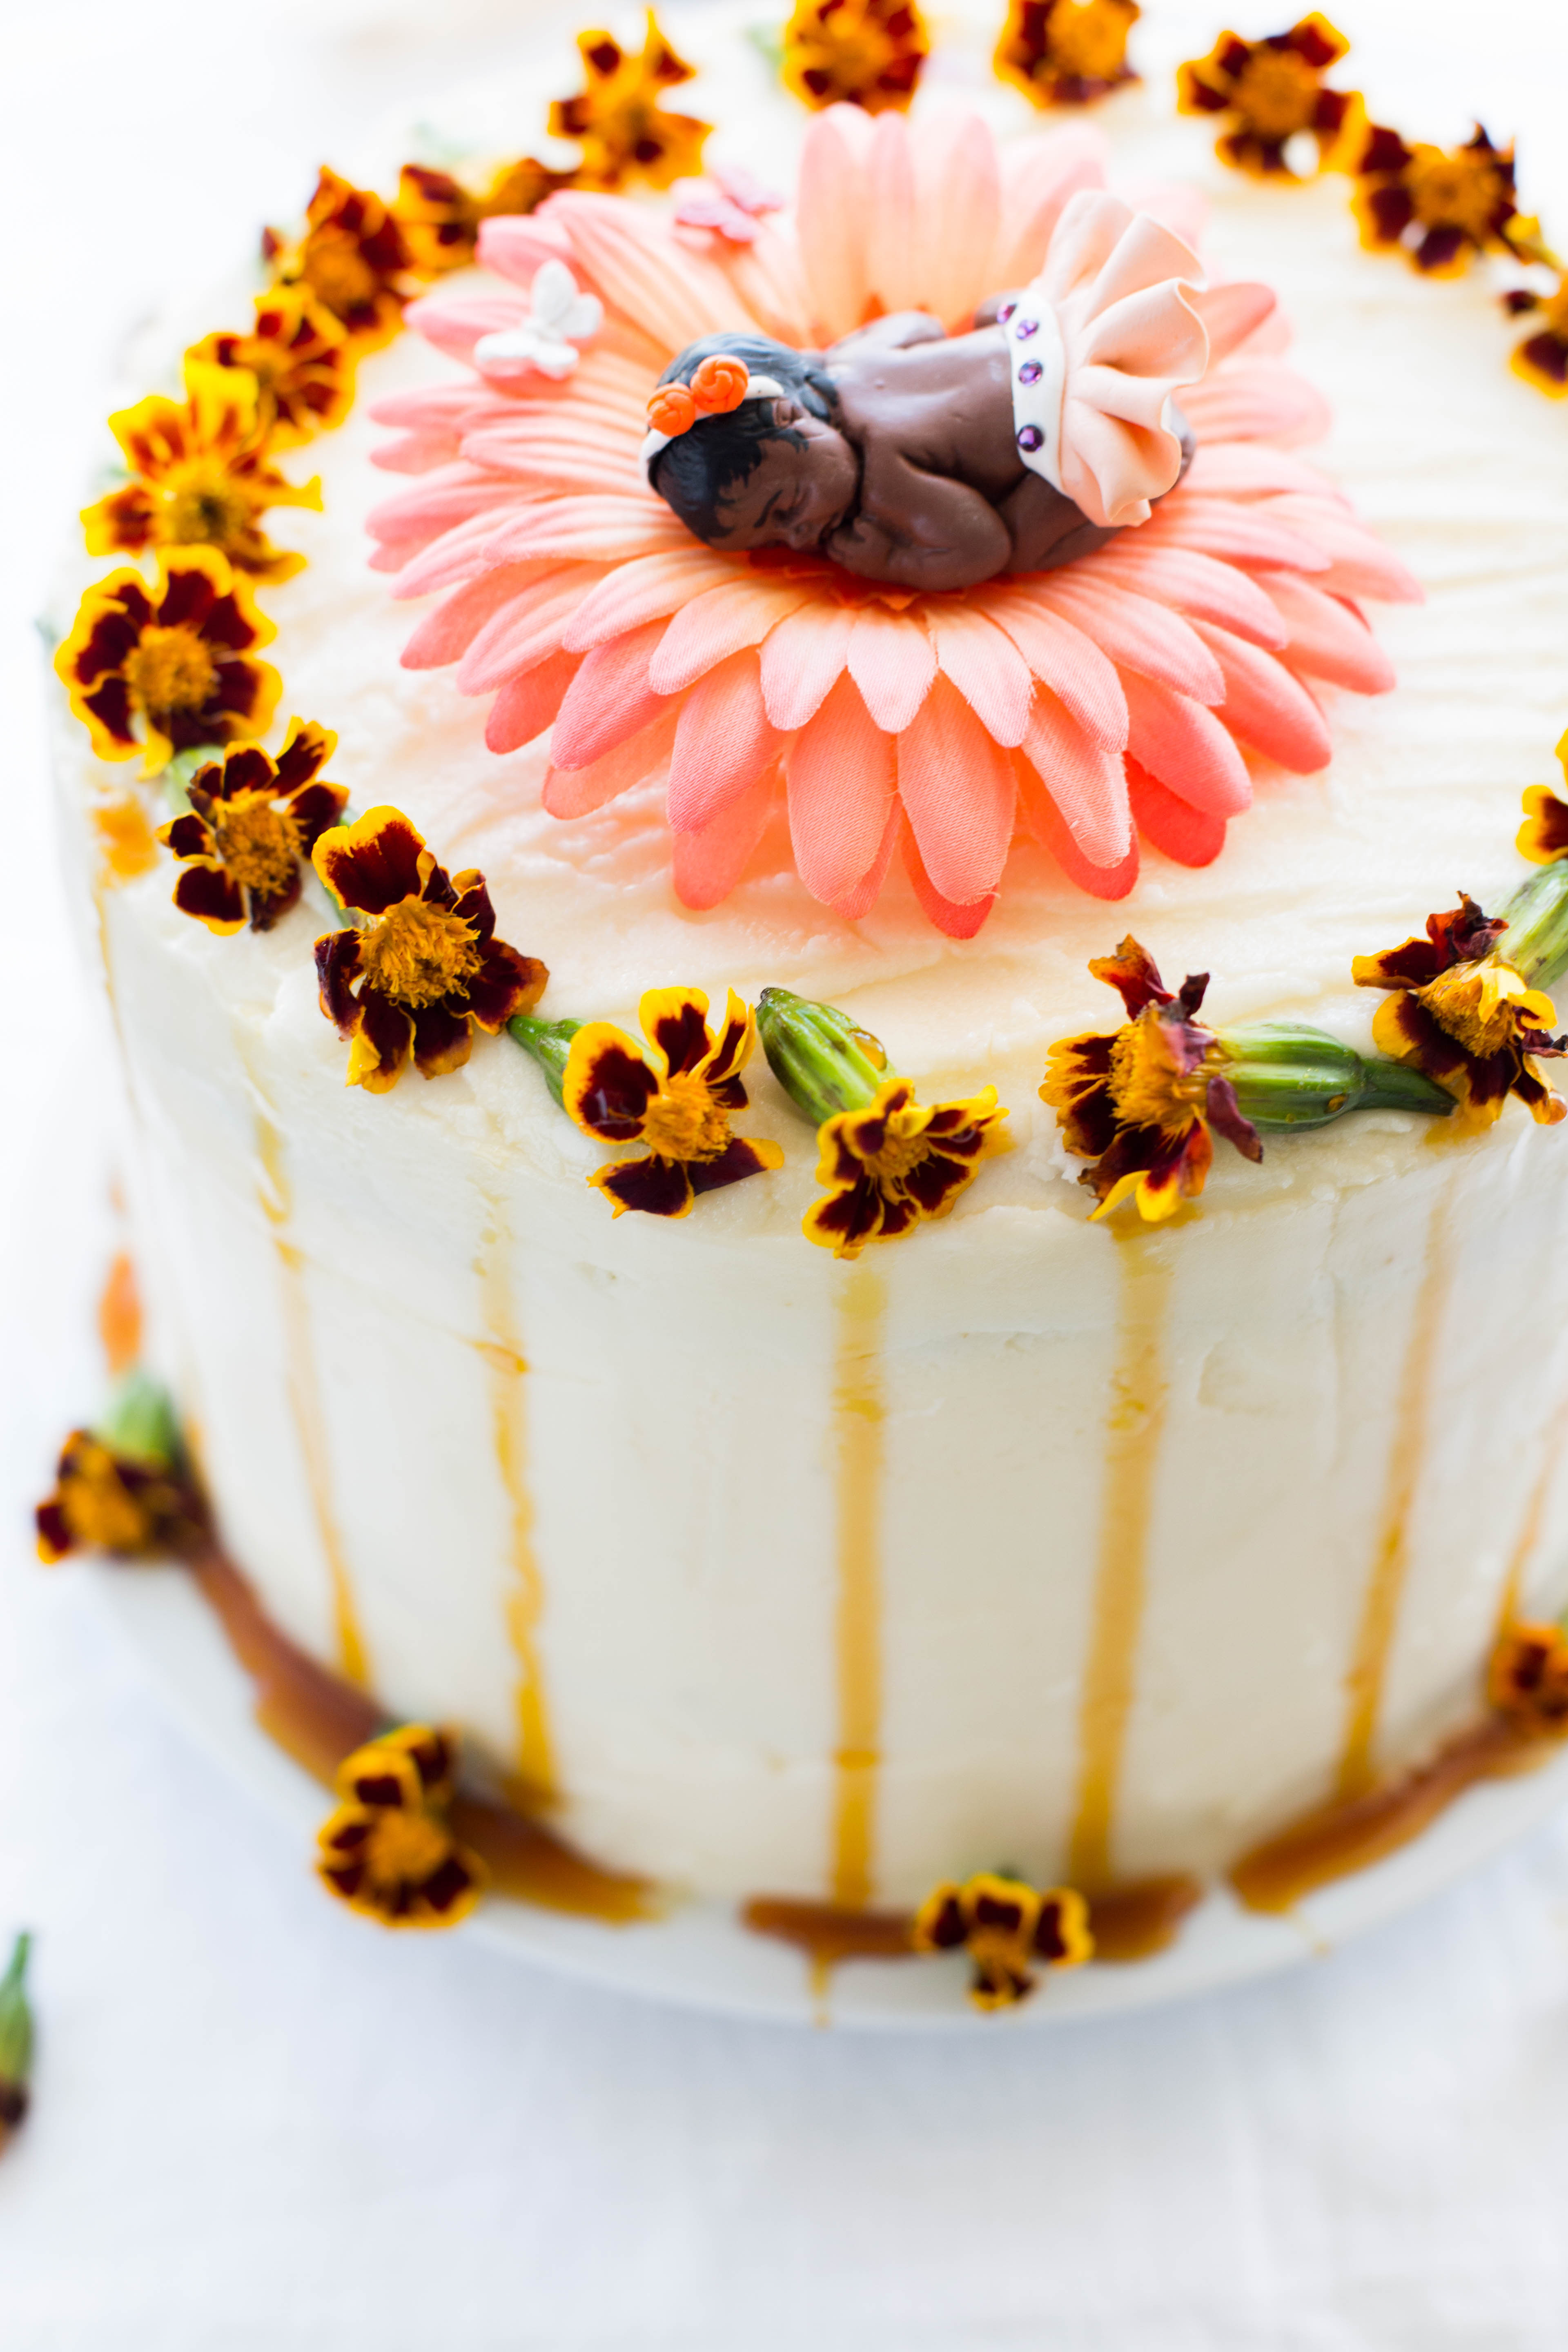 BUTTERNUT SQUASH CAKE WITH COCONUT FROSTING